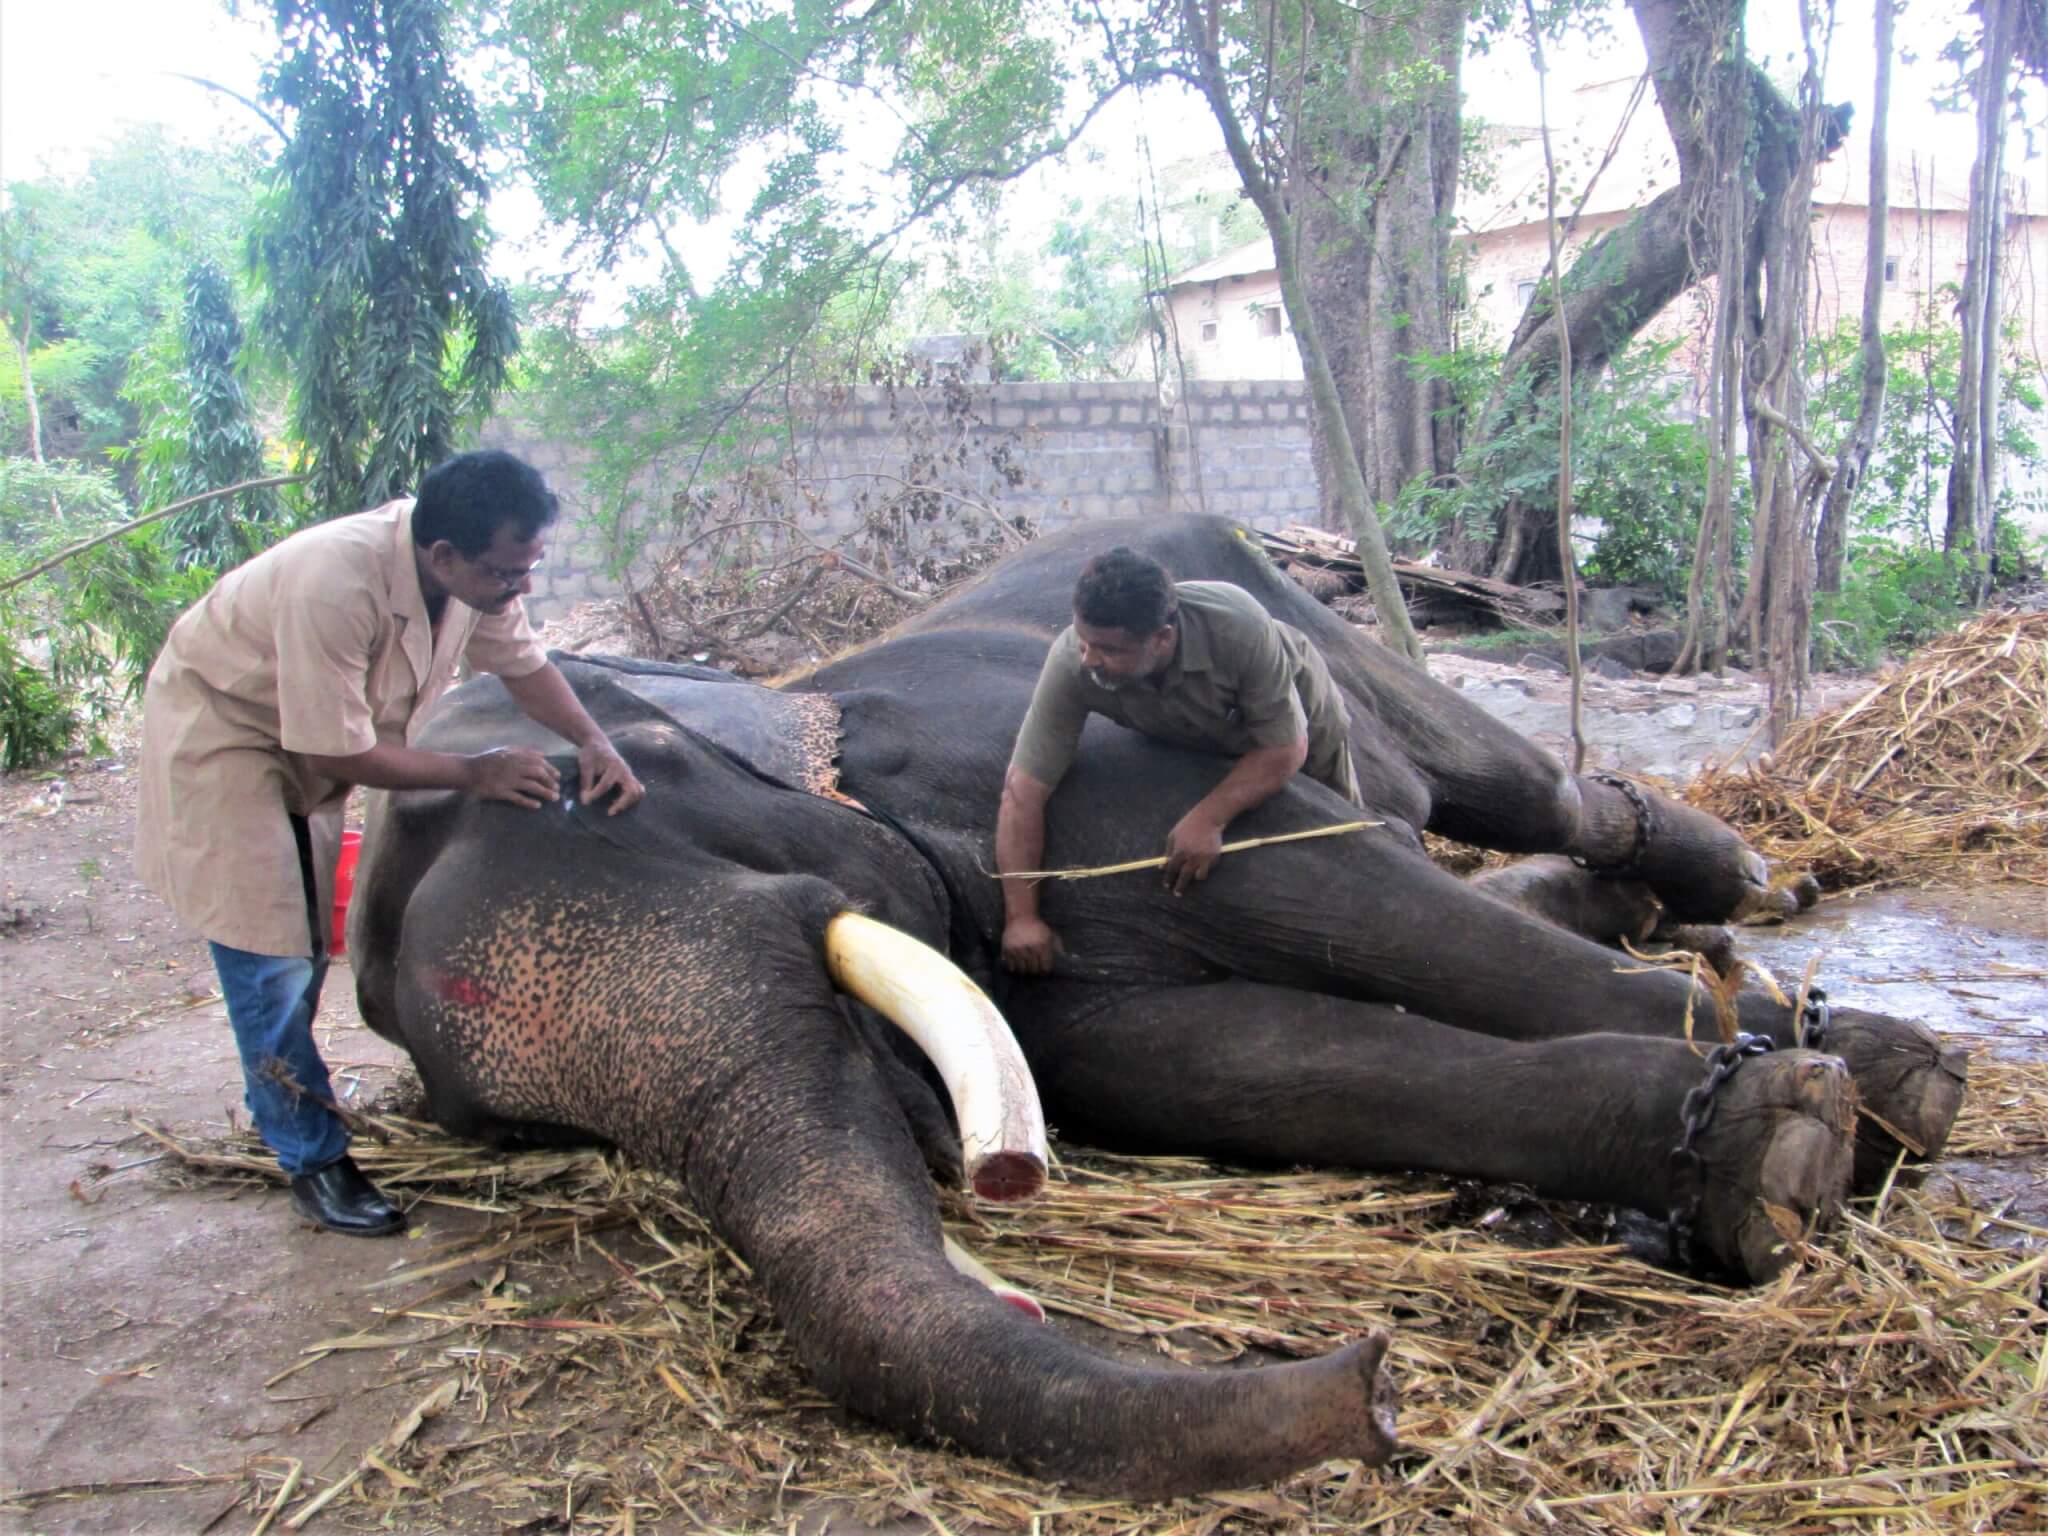 Gajraj lies sedated but still chained by at least three legs while an Animal Rahat veterinarian examines his eye to determine the extent of a problem with it.